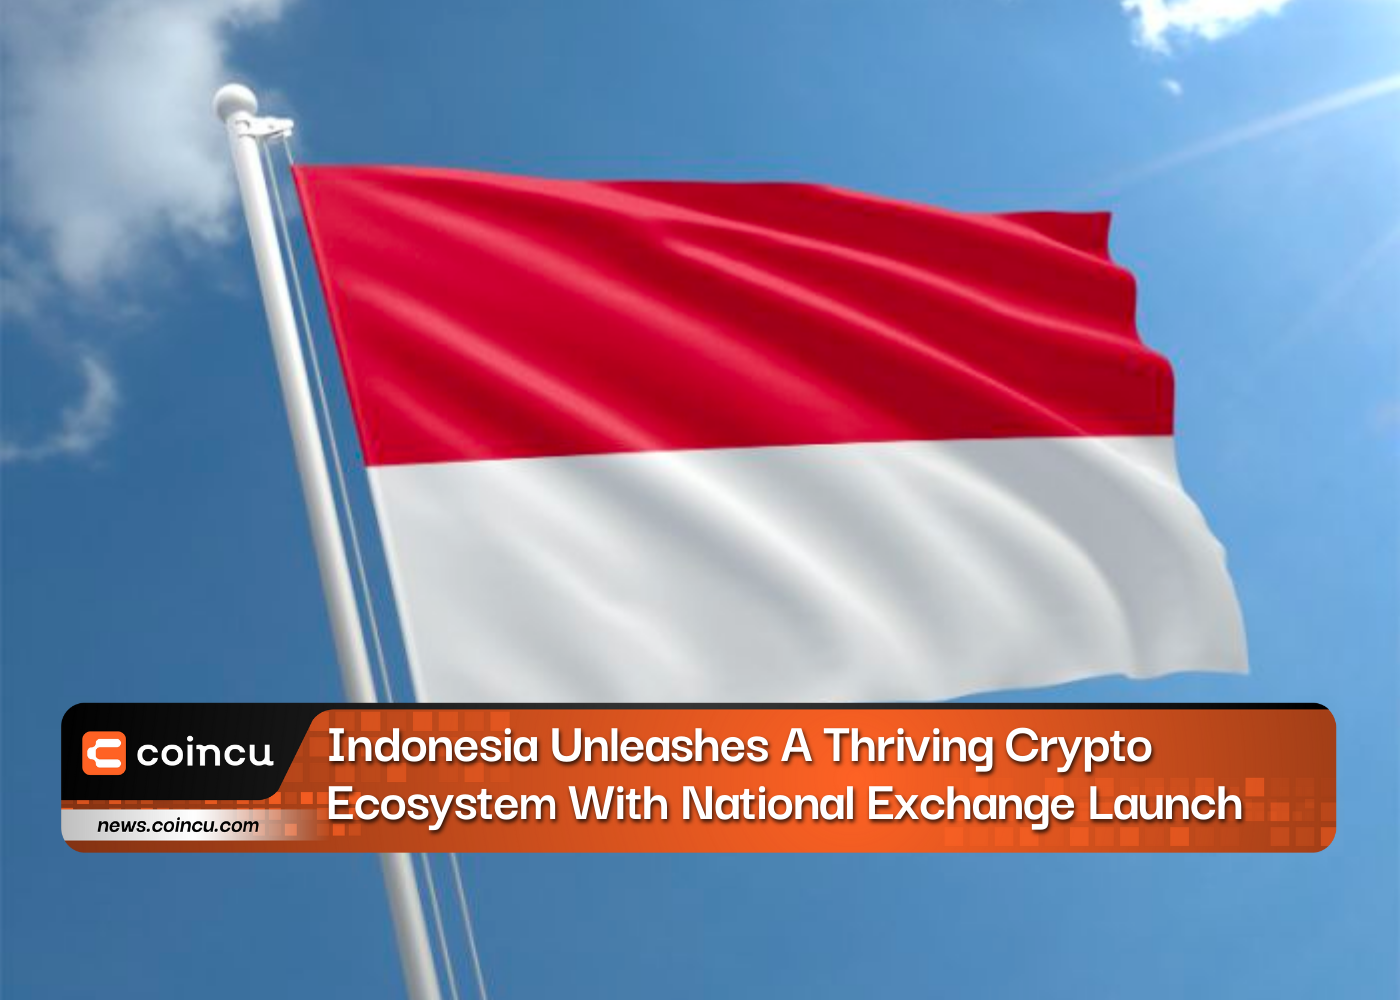 Indonesia Unleashes A Thriving Crypto Ecosystem With National Exchange Launch